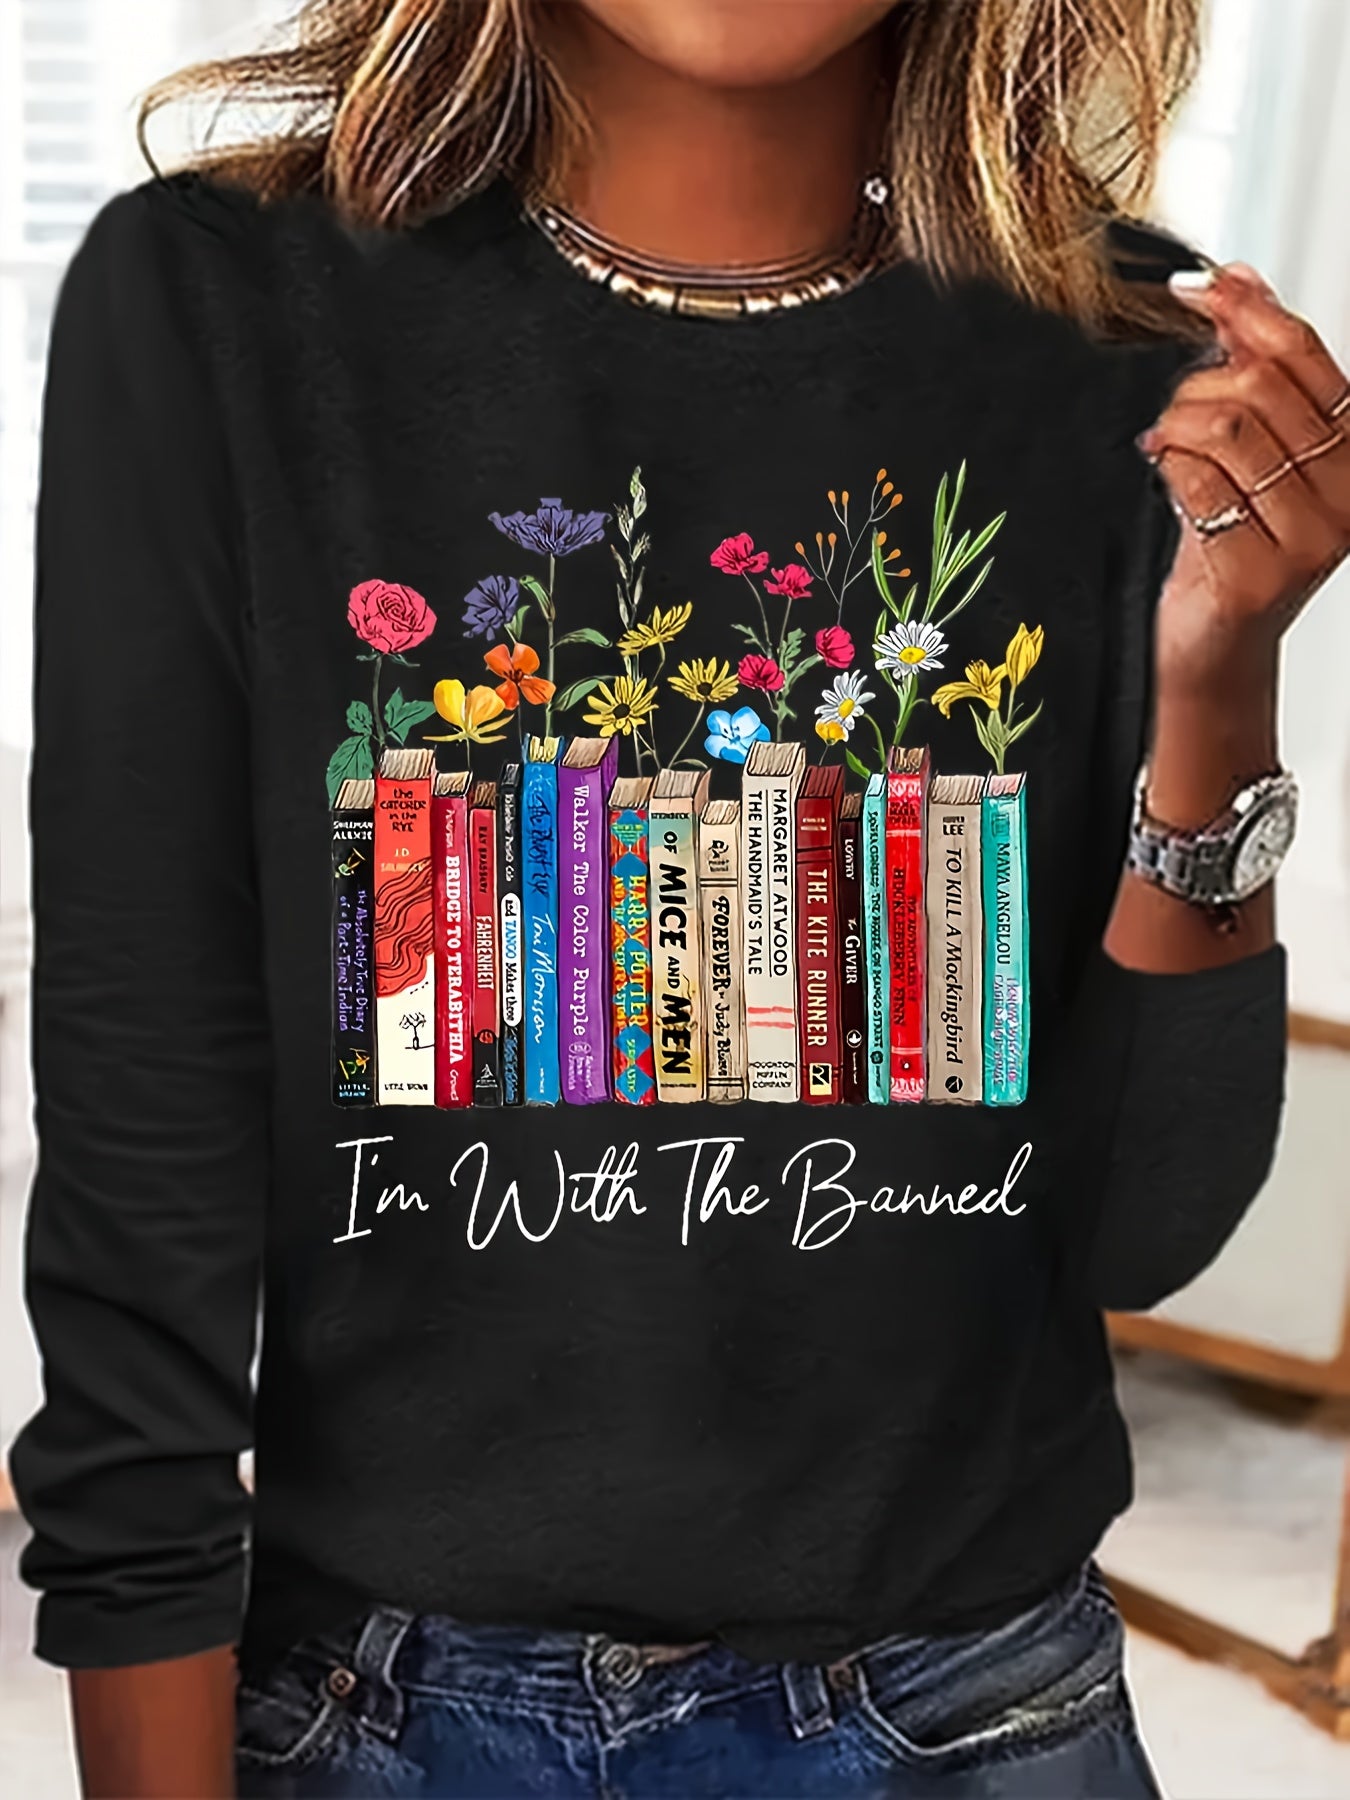 Women's Long Sleeve Top - "I'm With the Banned"